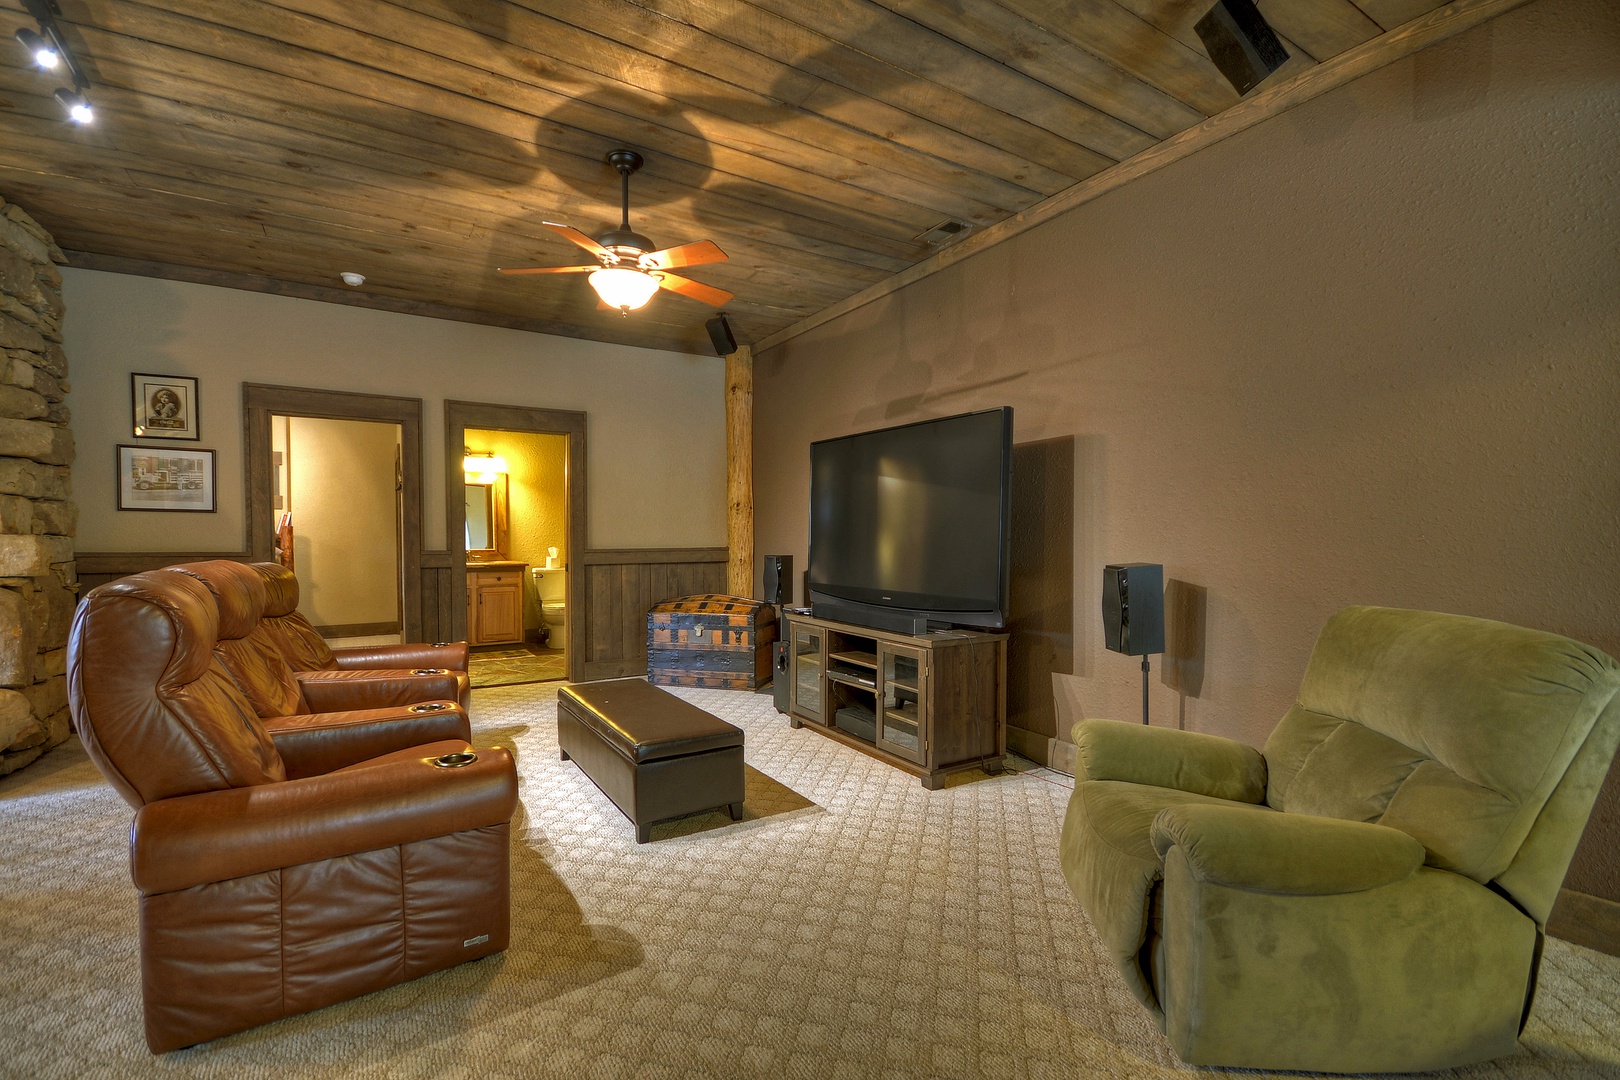 Reel Creek Lodge- 70 inch TV with theater style seating